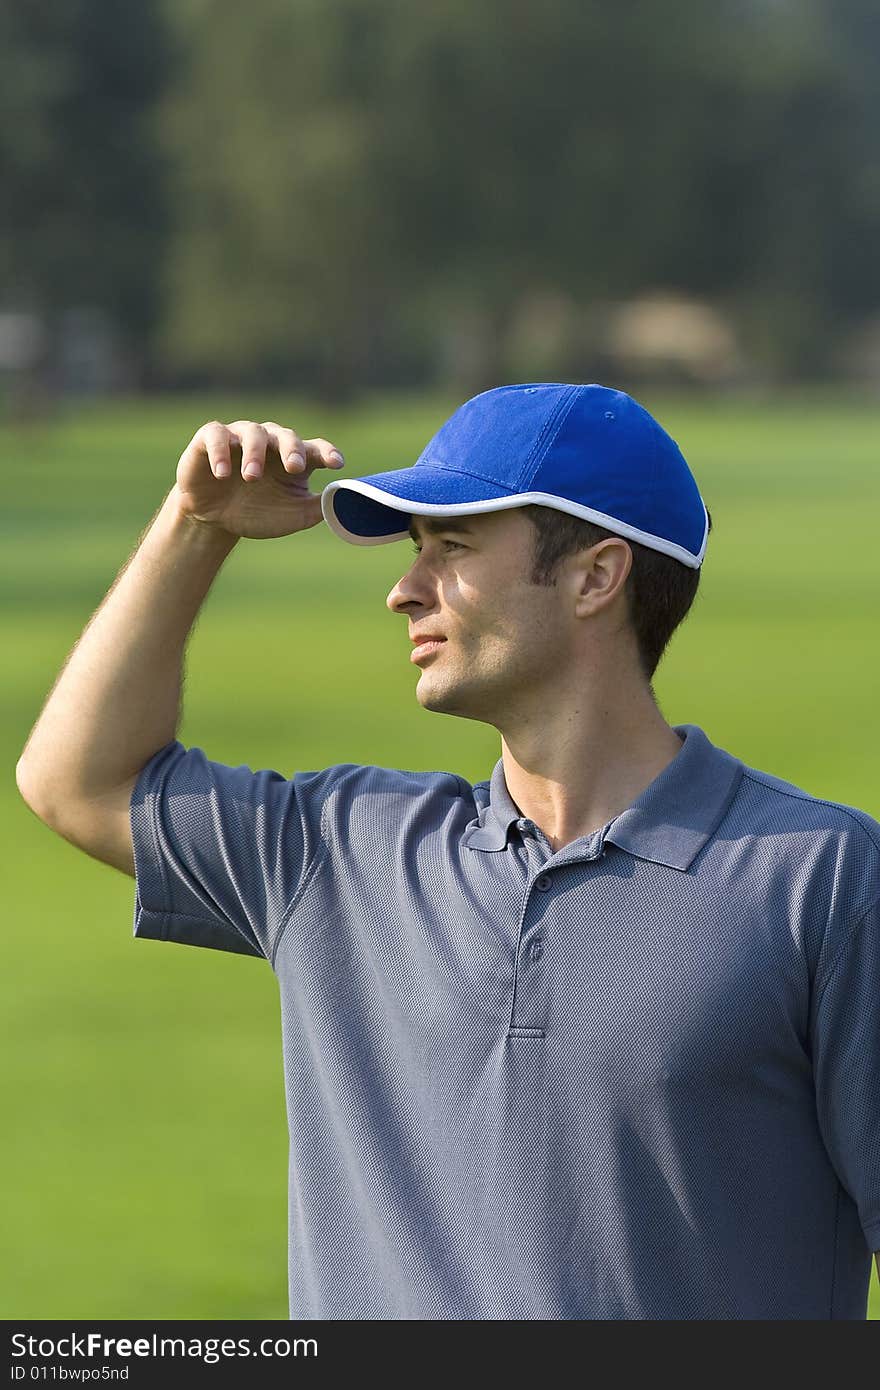 Man's profile while standing on golf course shielding eyes from sun - Vertically framed photo. Man's profile while standing on golf course shielding eyes from sun - Vertically framed photo